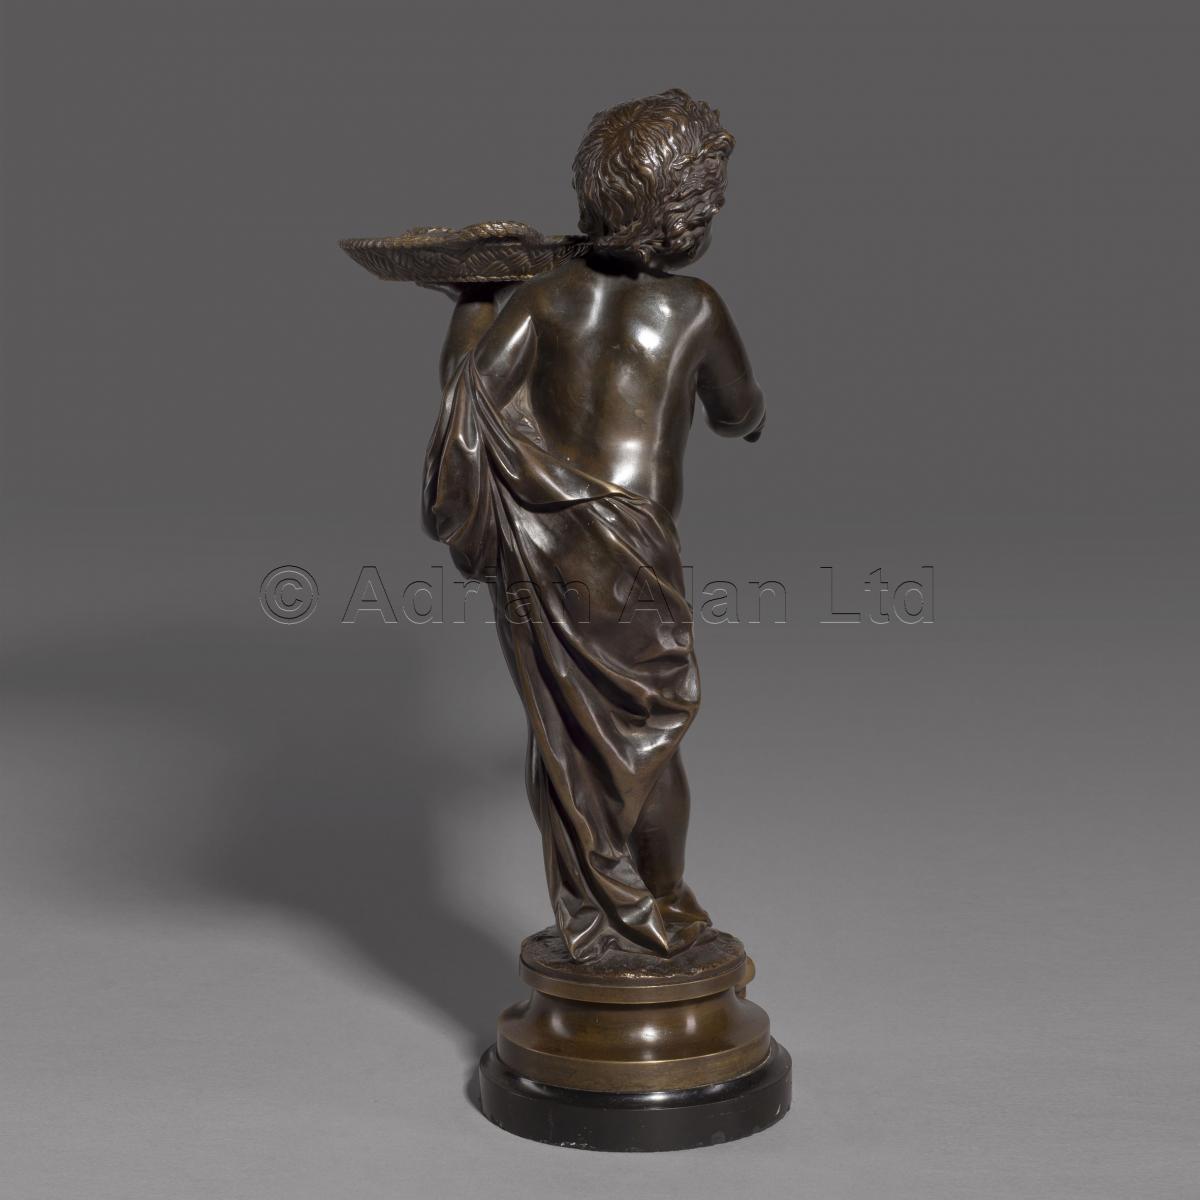 Patinated Bronze Figure by Adolphe Maubach